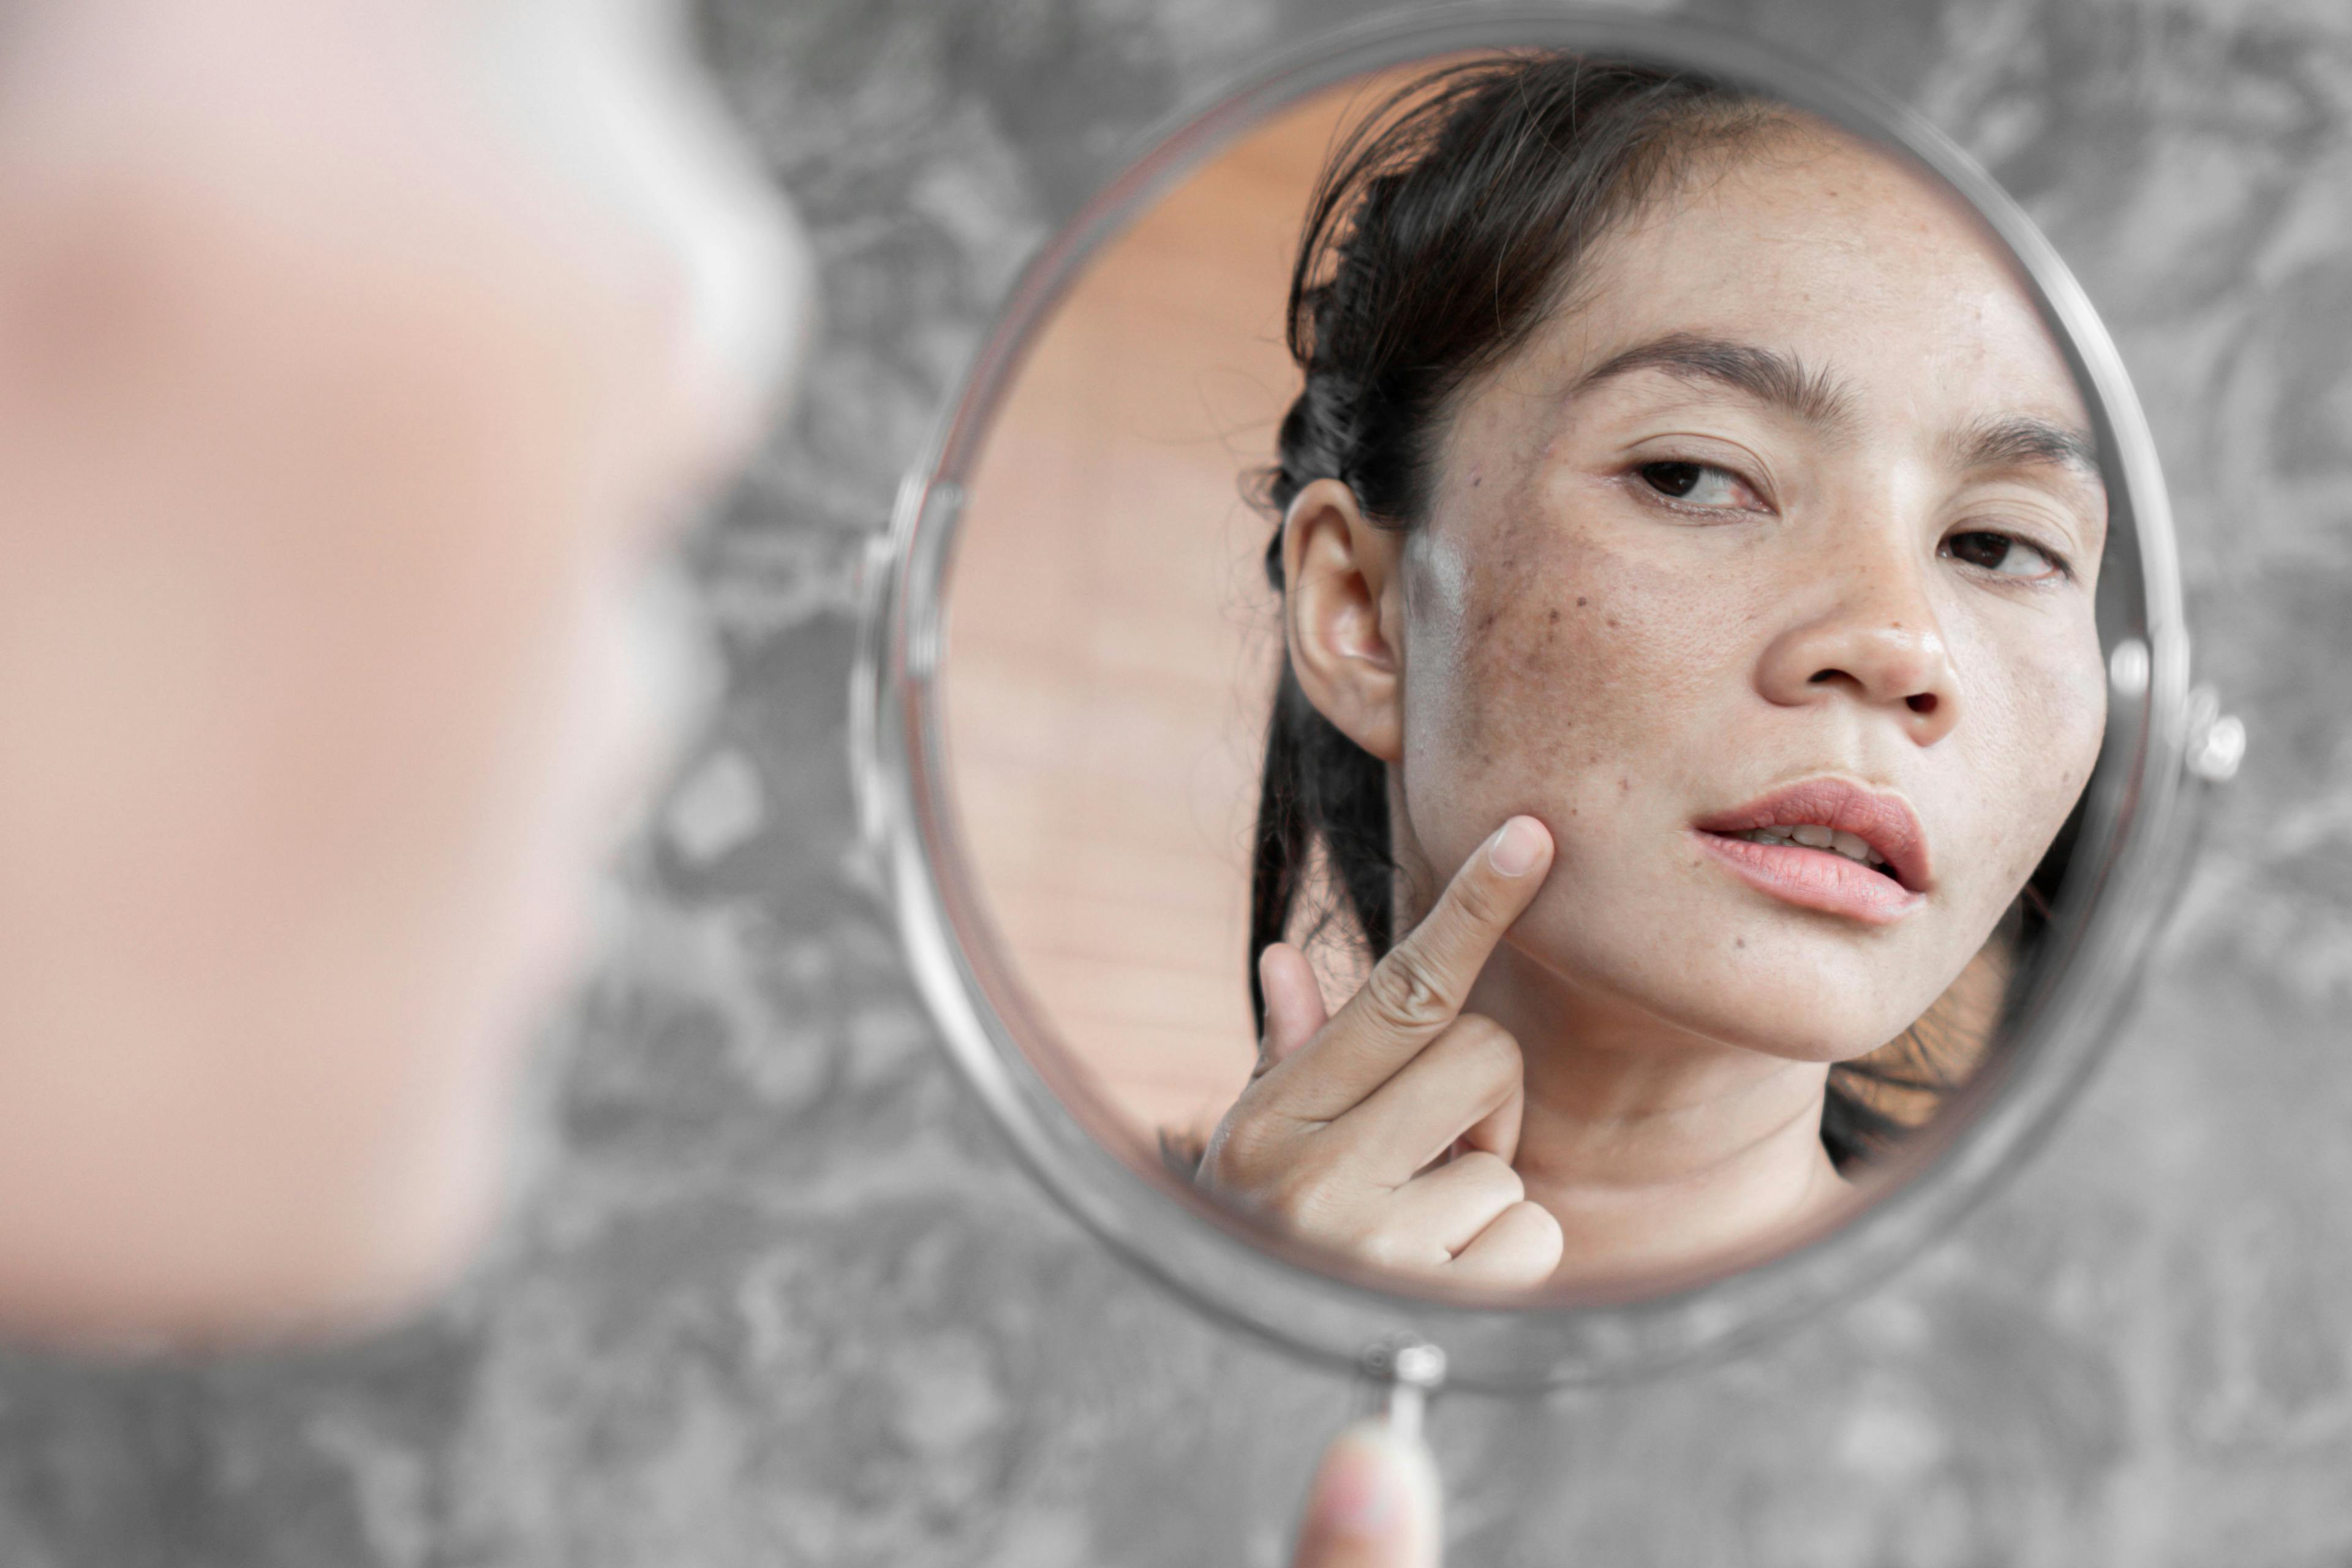 Study: What Role Does Diet Have in Acne?